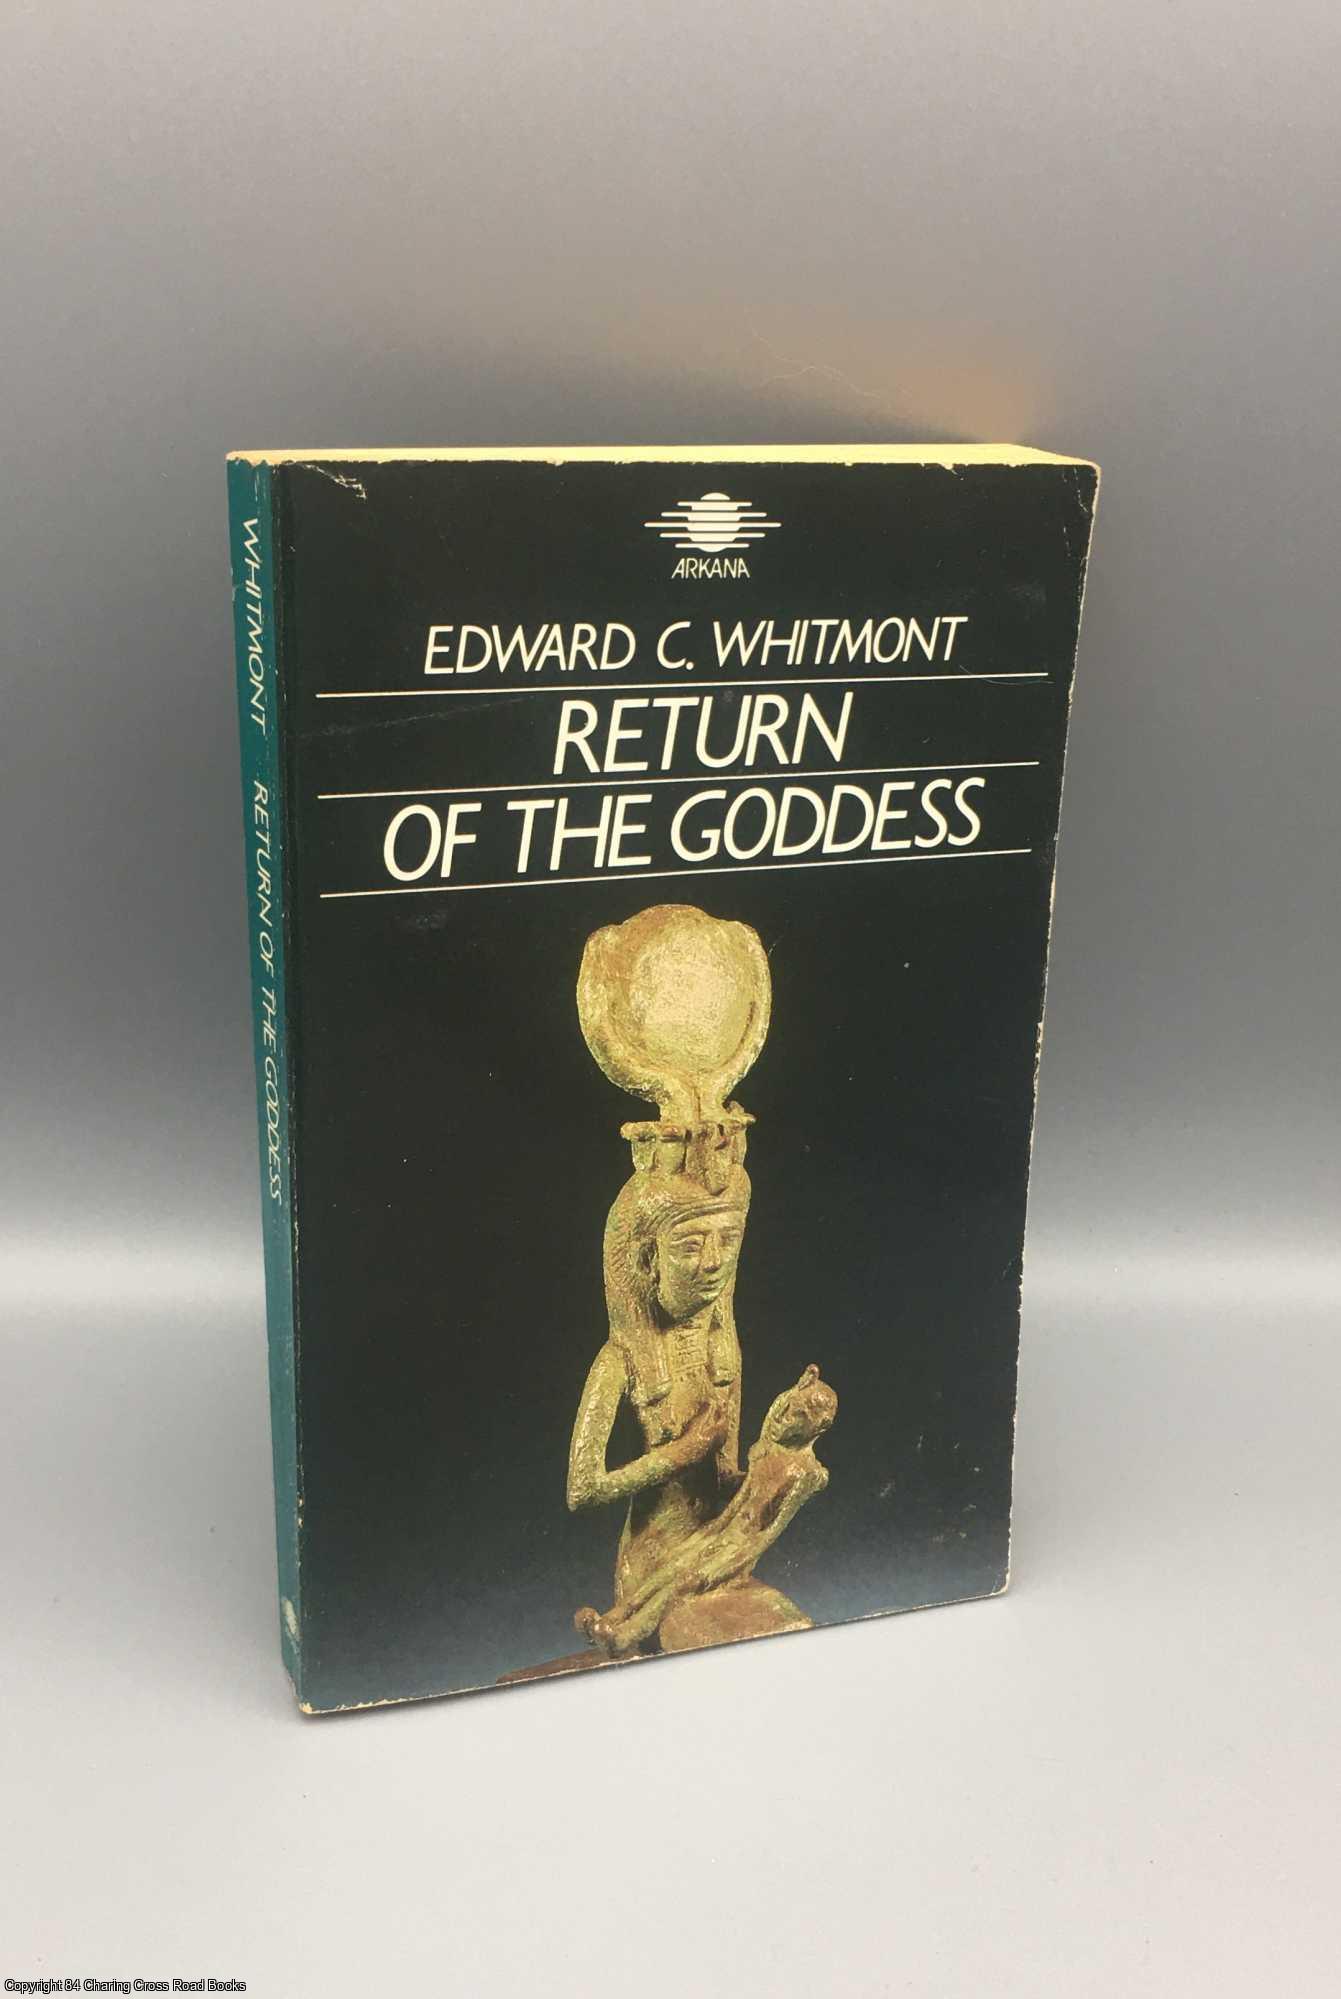 Whitmont, Edward - Return of the Goddess: Femininity, Aggression and the Modern Grail Quest